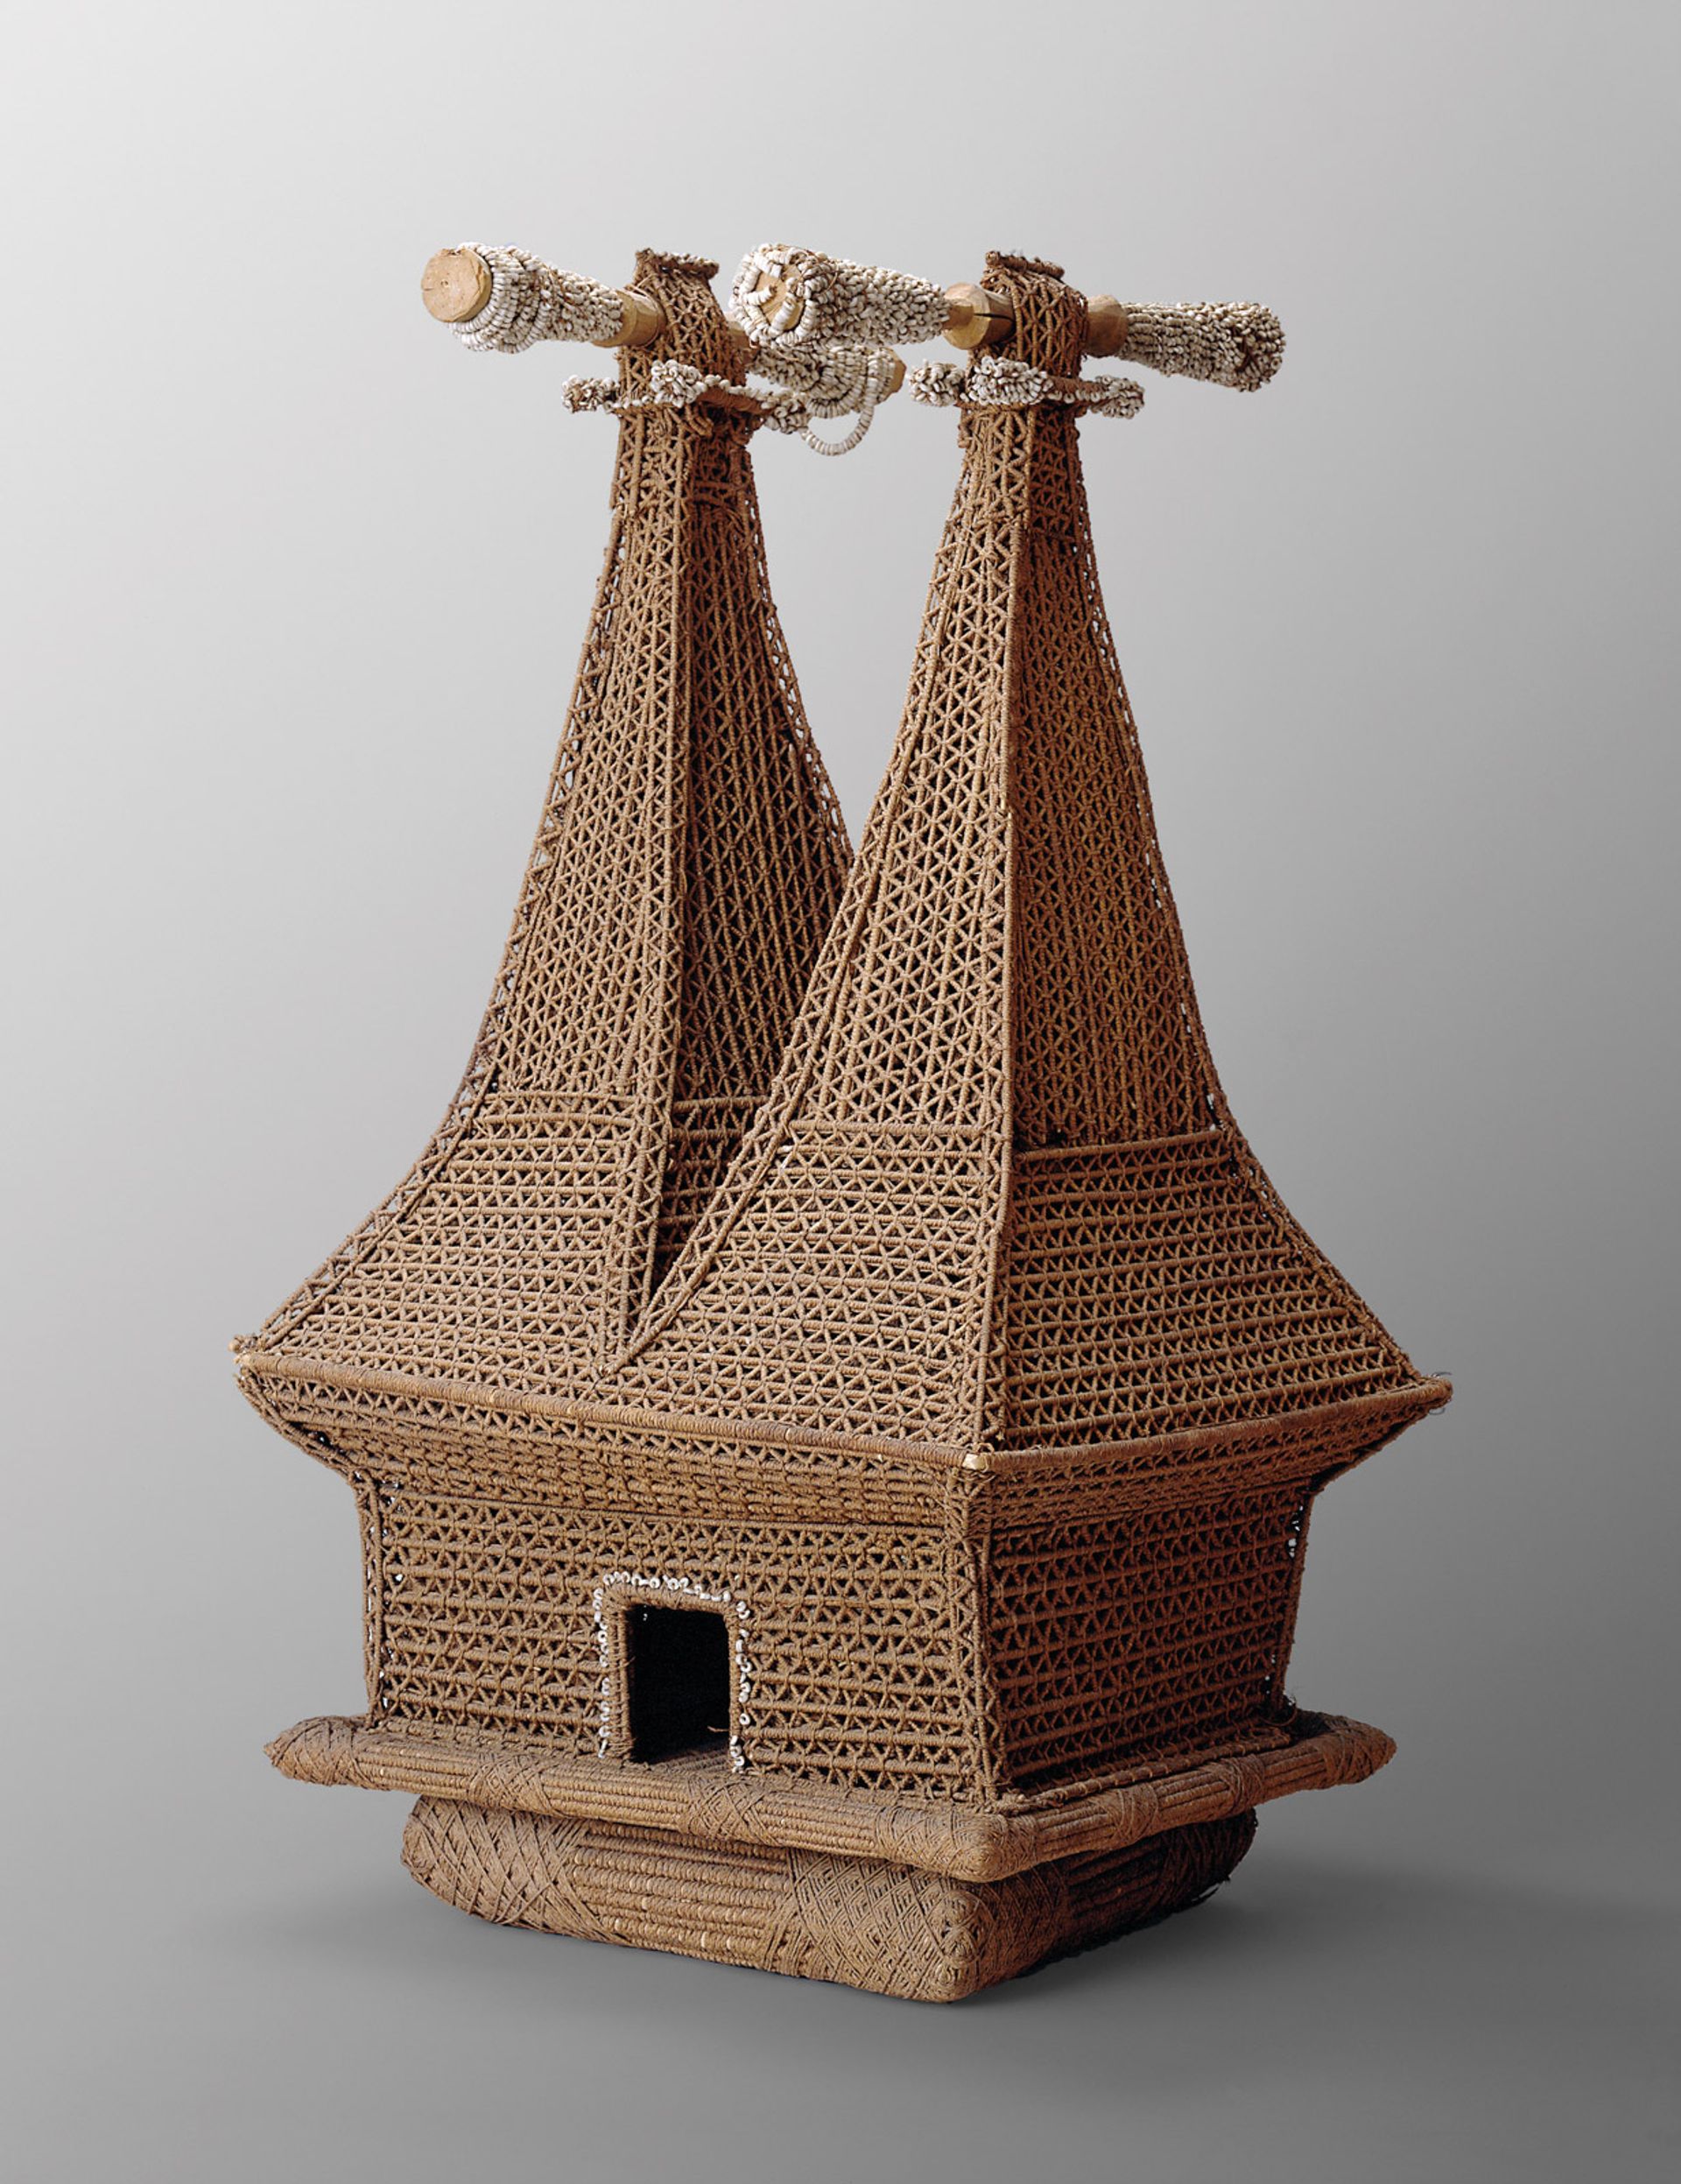 An early 19th-century double portable temple (bure kalou) made from coir, wood, reed and shells Courtesy of the Peabody Essex Museum